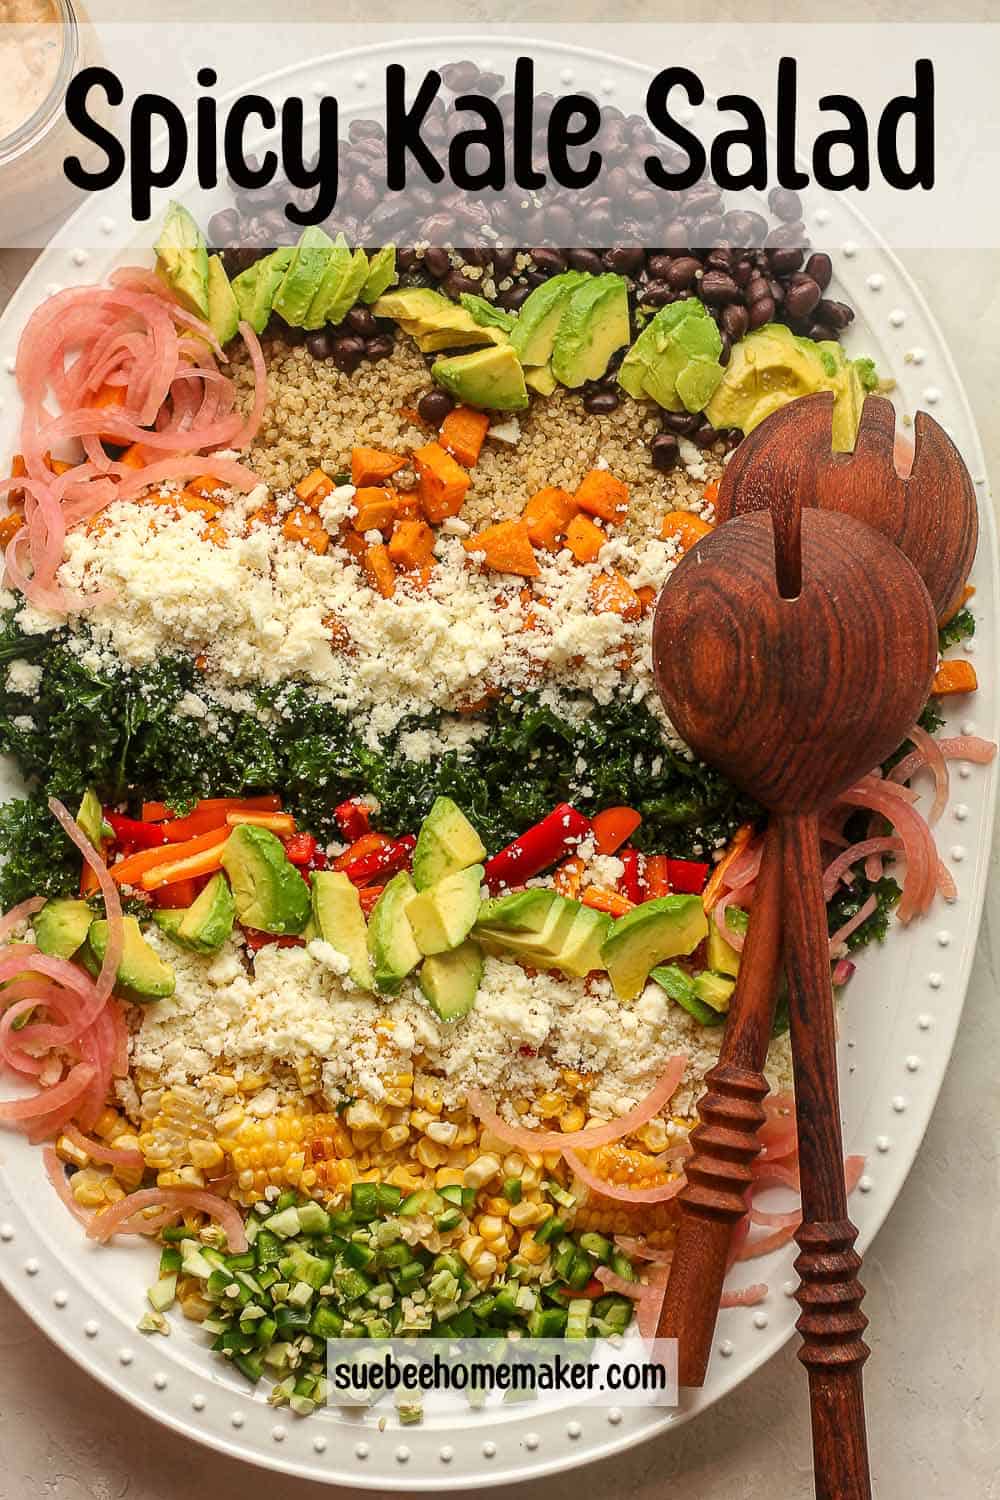 An oblong tray of a spicy kale salad with wooden spoons.